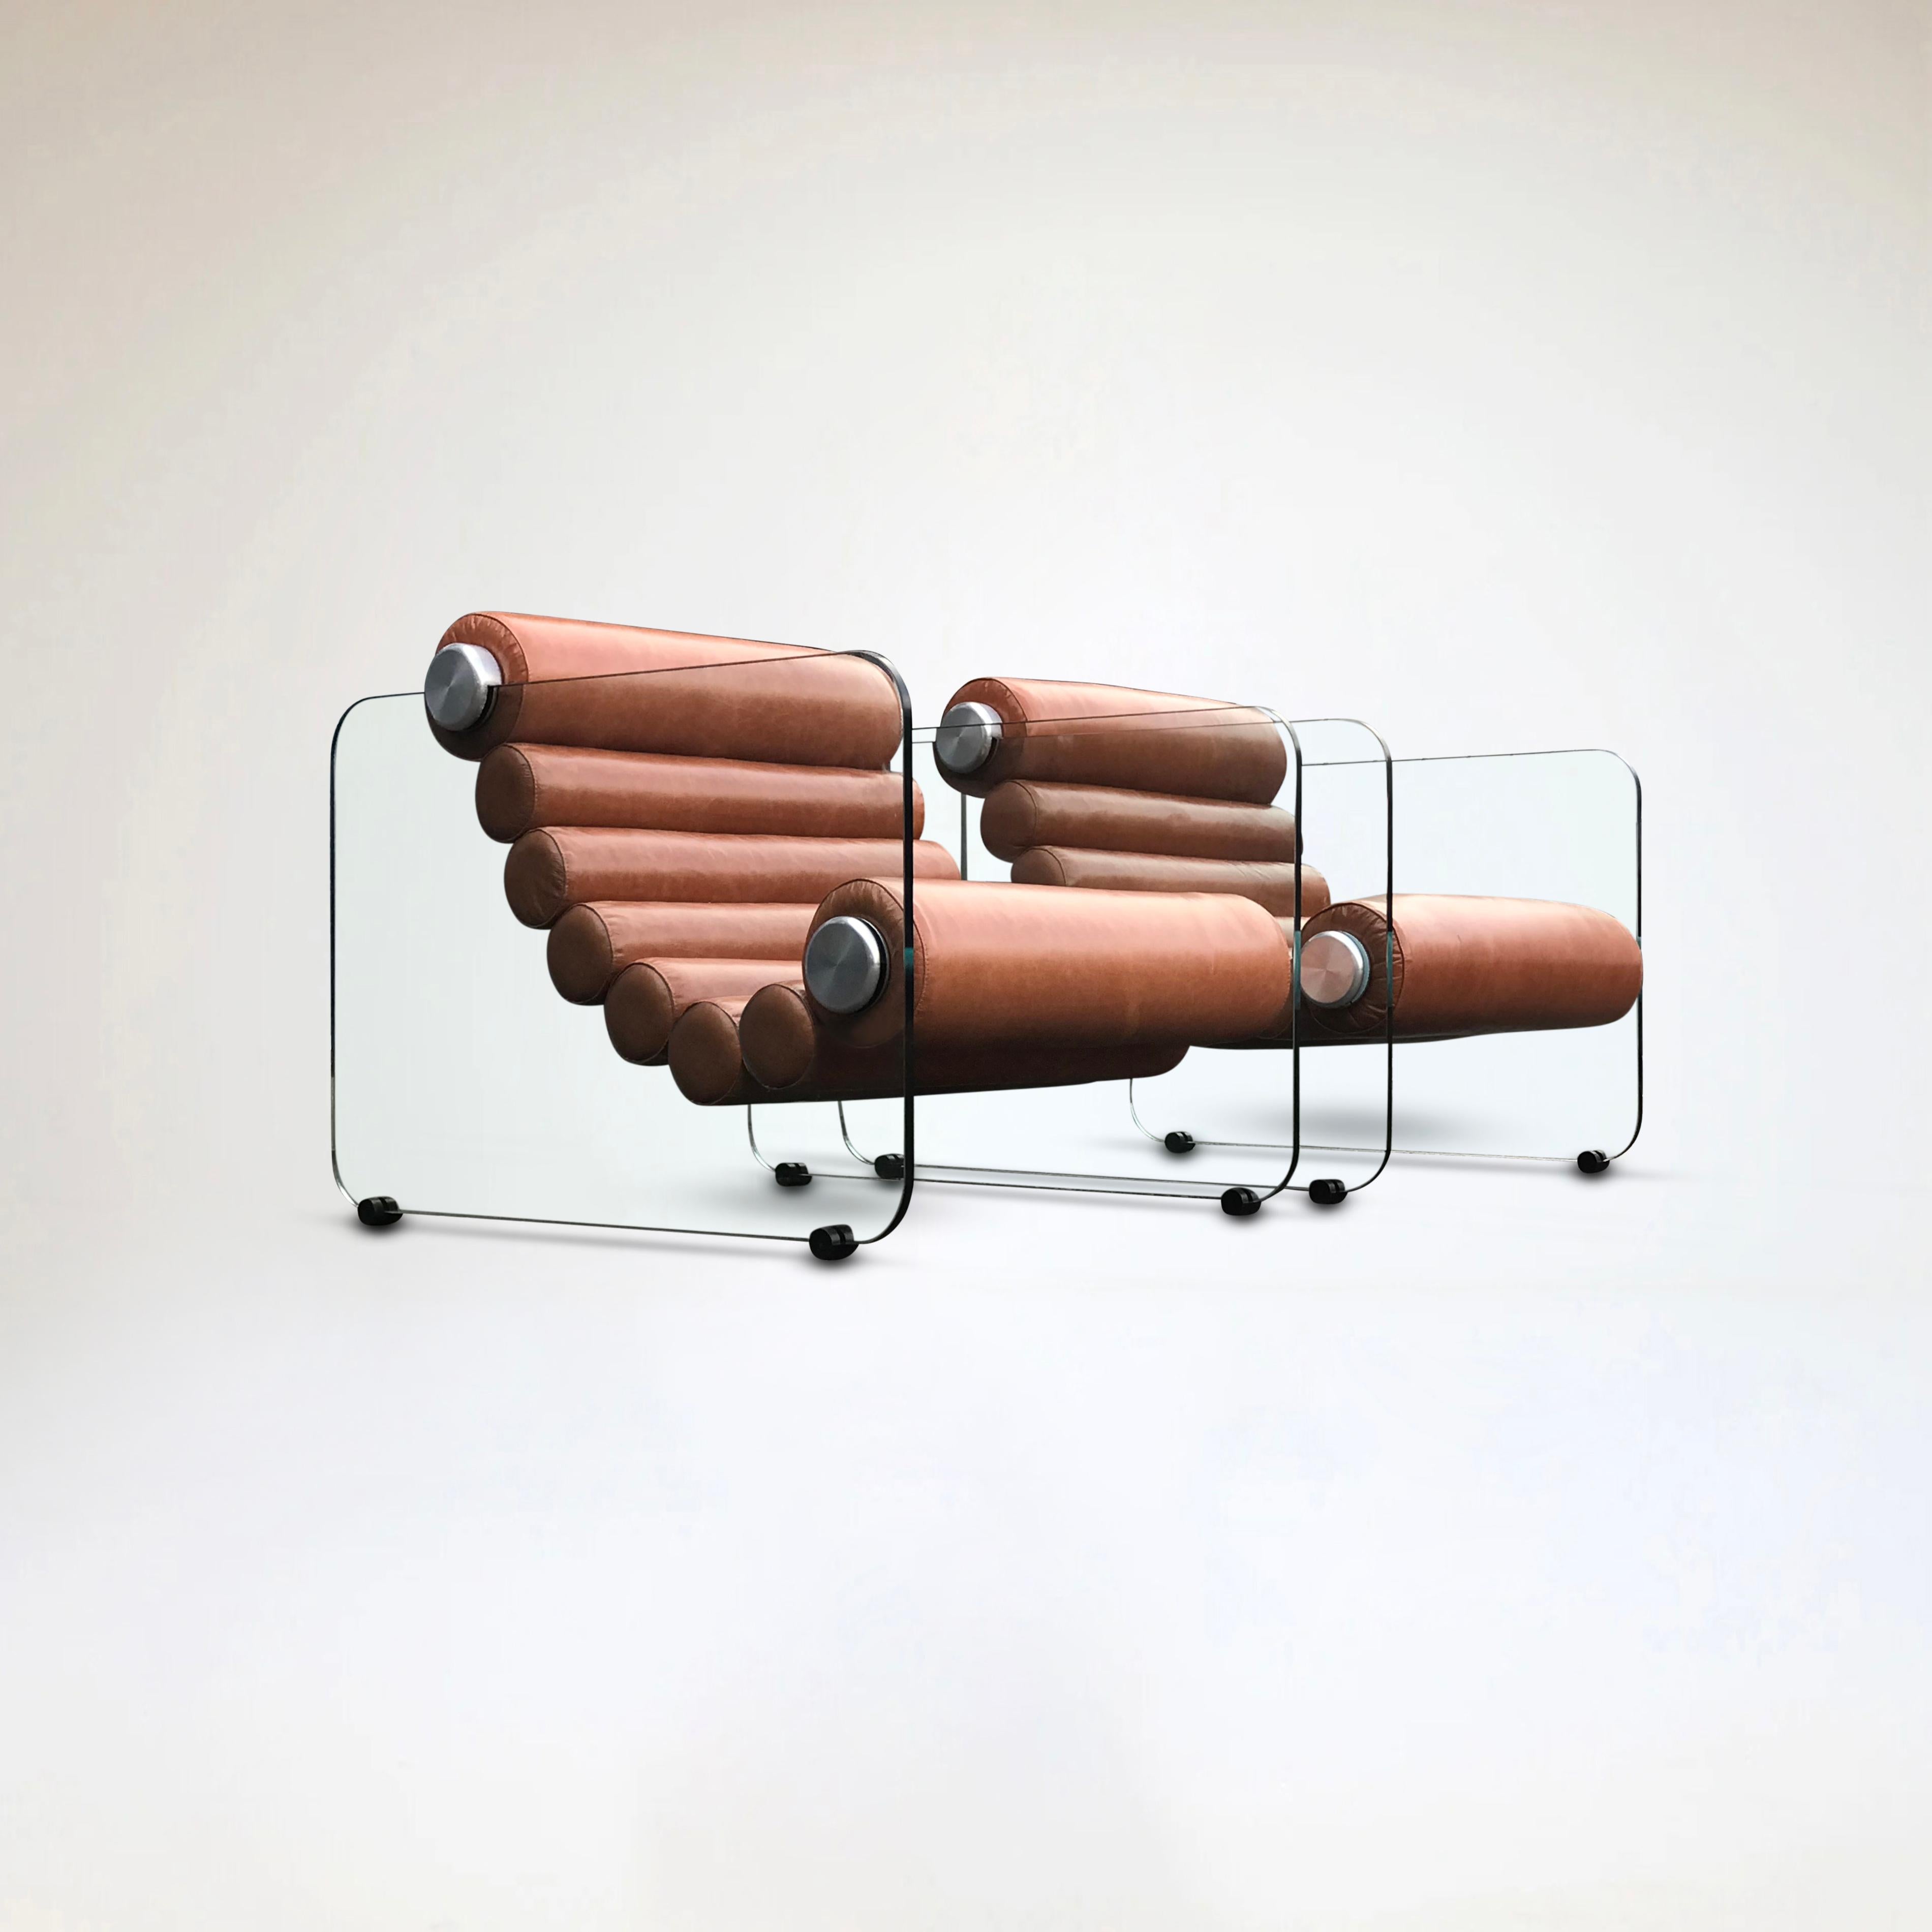 Italian space age design by Fabio Lenci, the Hyaline (pronounced as “Hay’Line) chairs are a prime example of Italian design of the time period.

The thick leather rolls are interconnected in a flexible form and are fixed to the glass plates on the